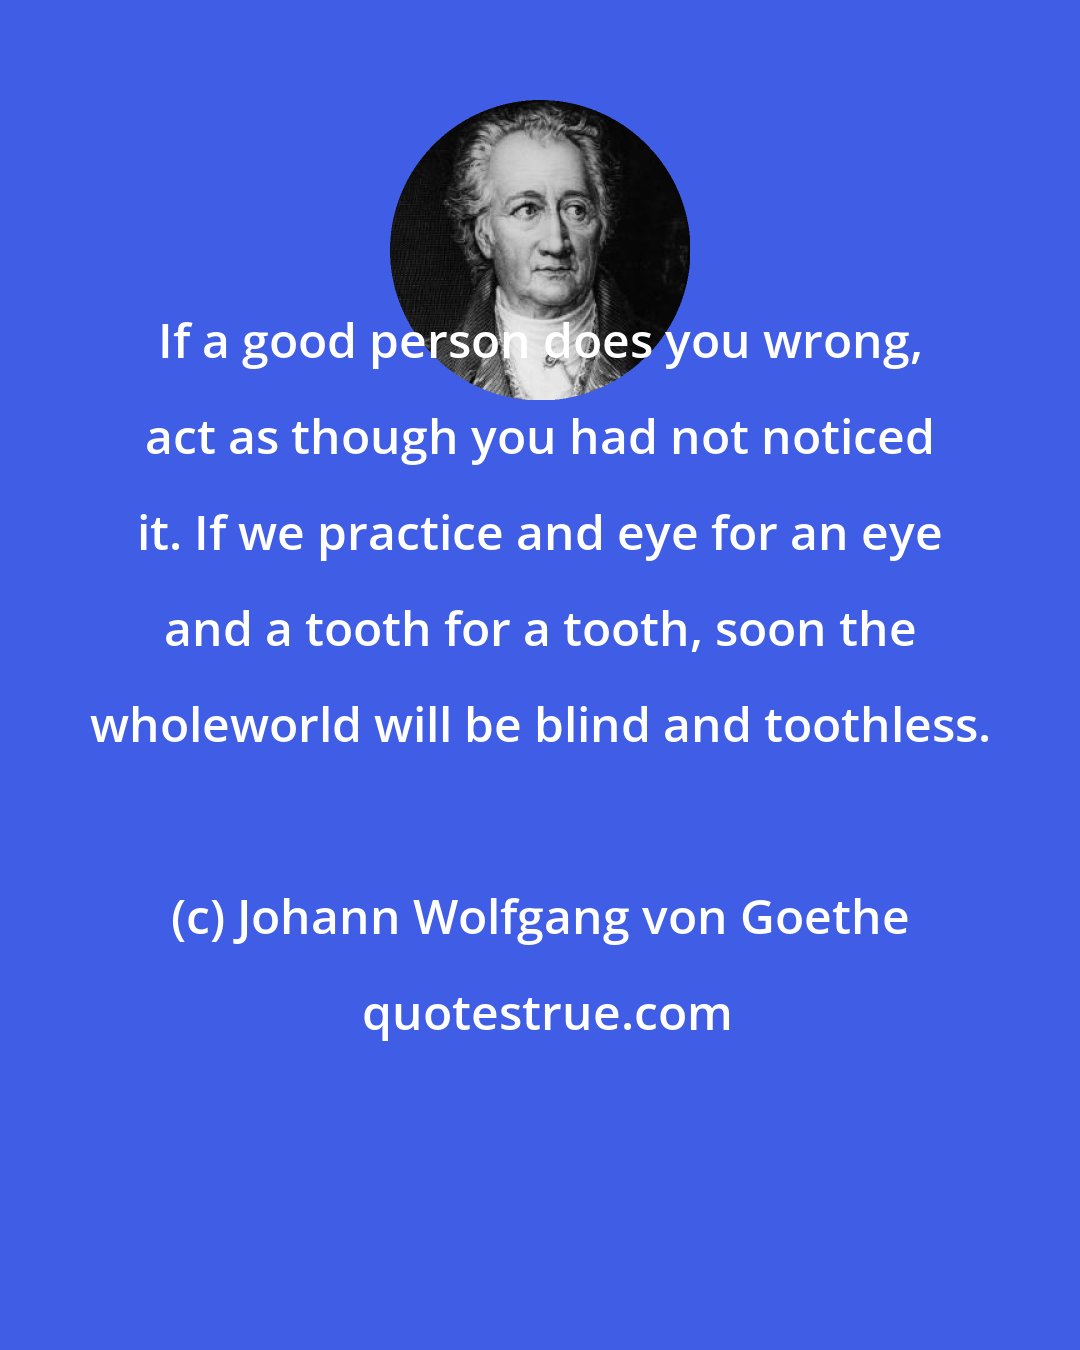 Johann Wolfgang von Goethe: If a good person does you wrong, act as though you had not noticed it. If we practice and eye for an eye and a tooth for a tooth, soon the wholeworld will be blind and toothless.